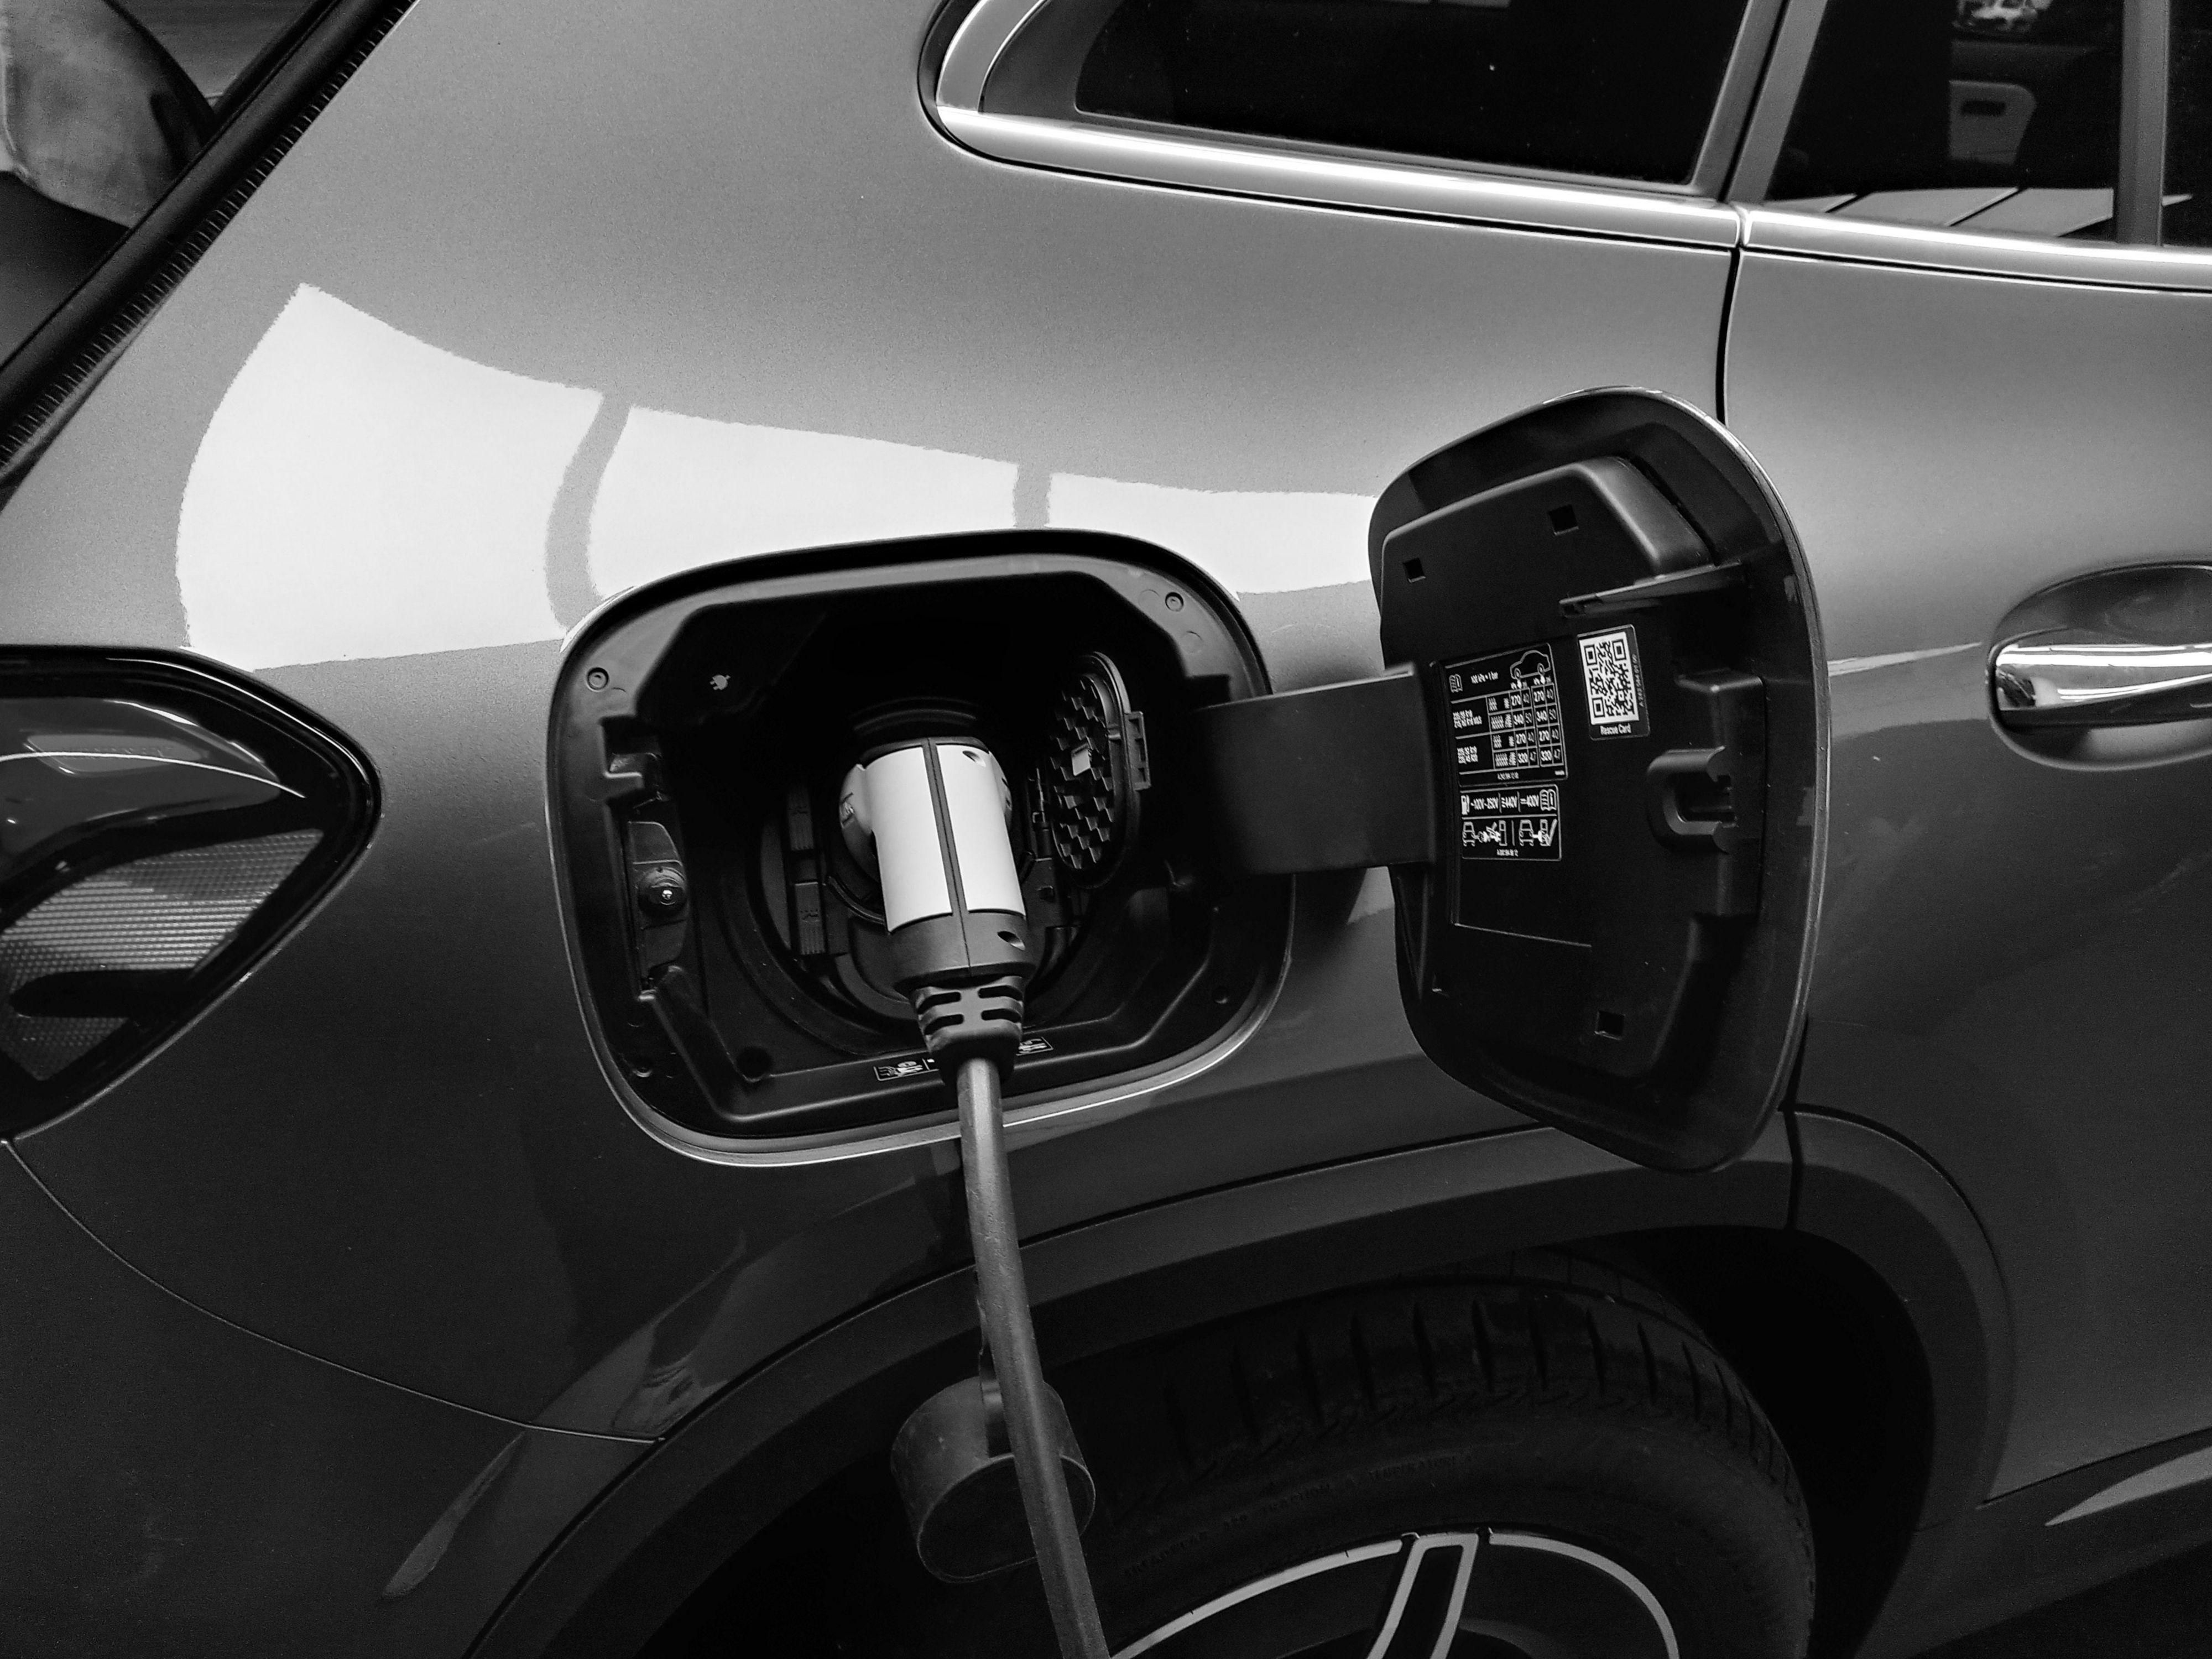 Attention all Electric Car owners